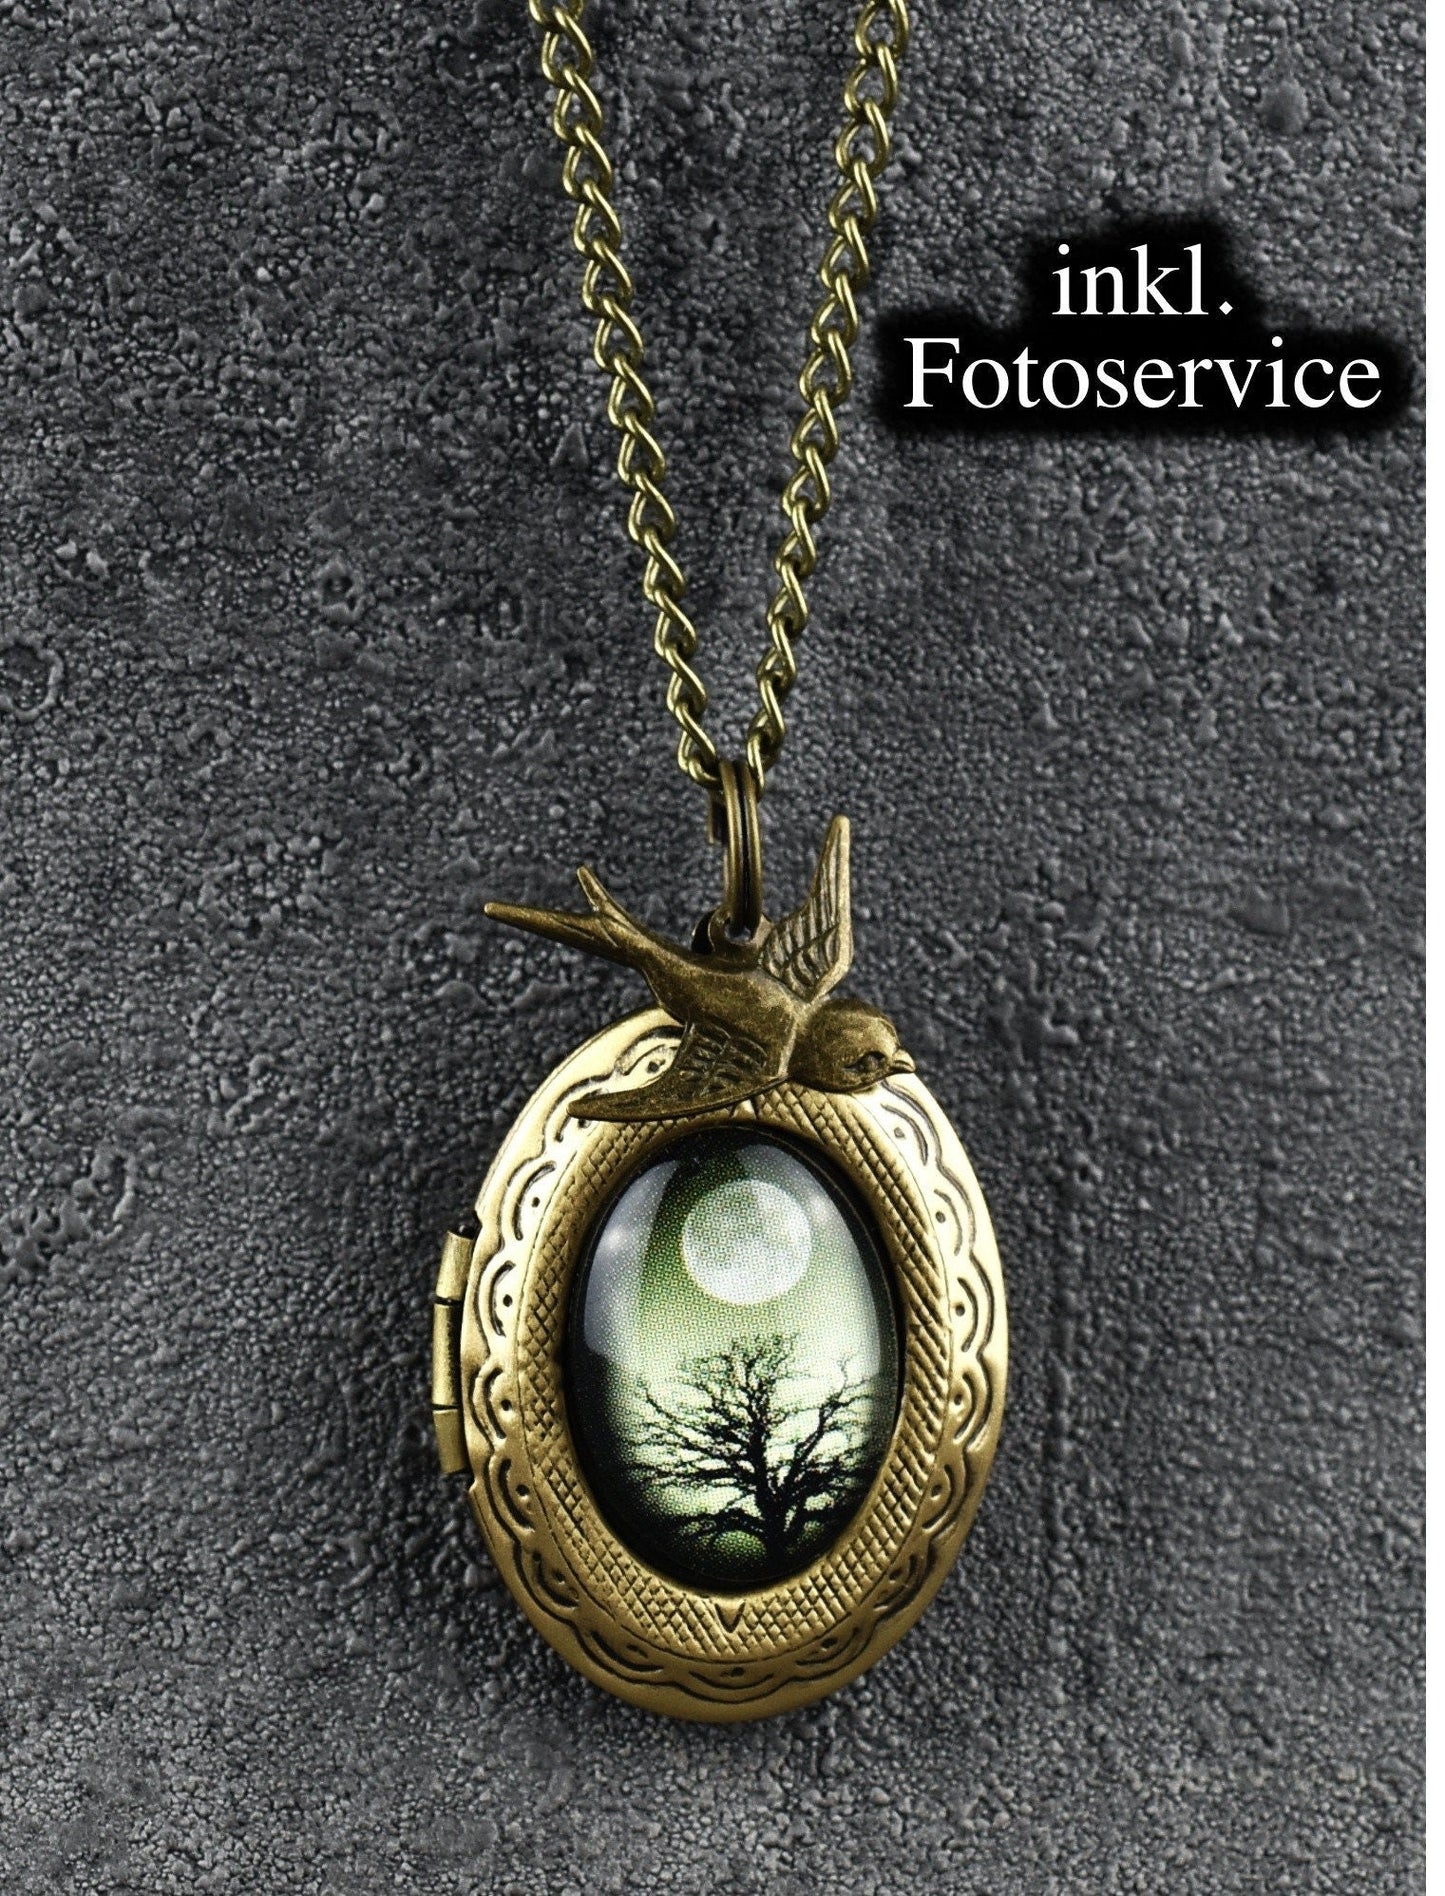 Photoservice obejmuje personalizable Mystic Forest Swallow Fotomed Linen Wisiorek Łańcuch - Vik-29